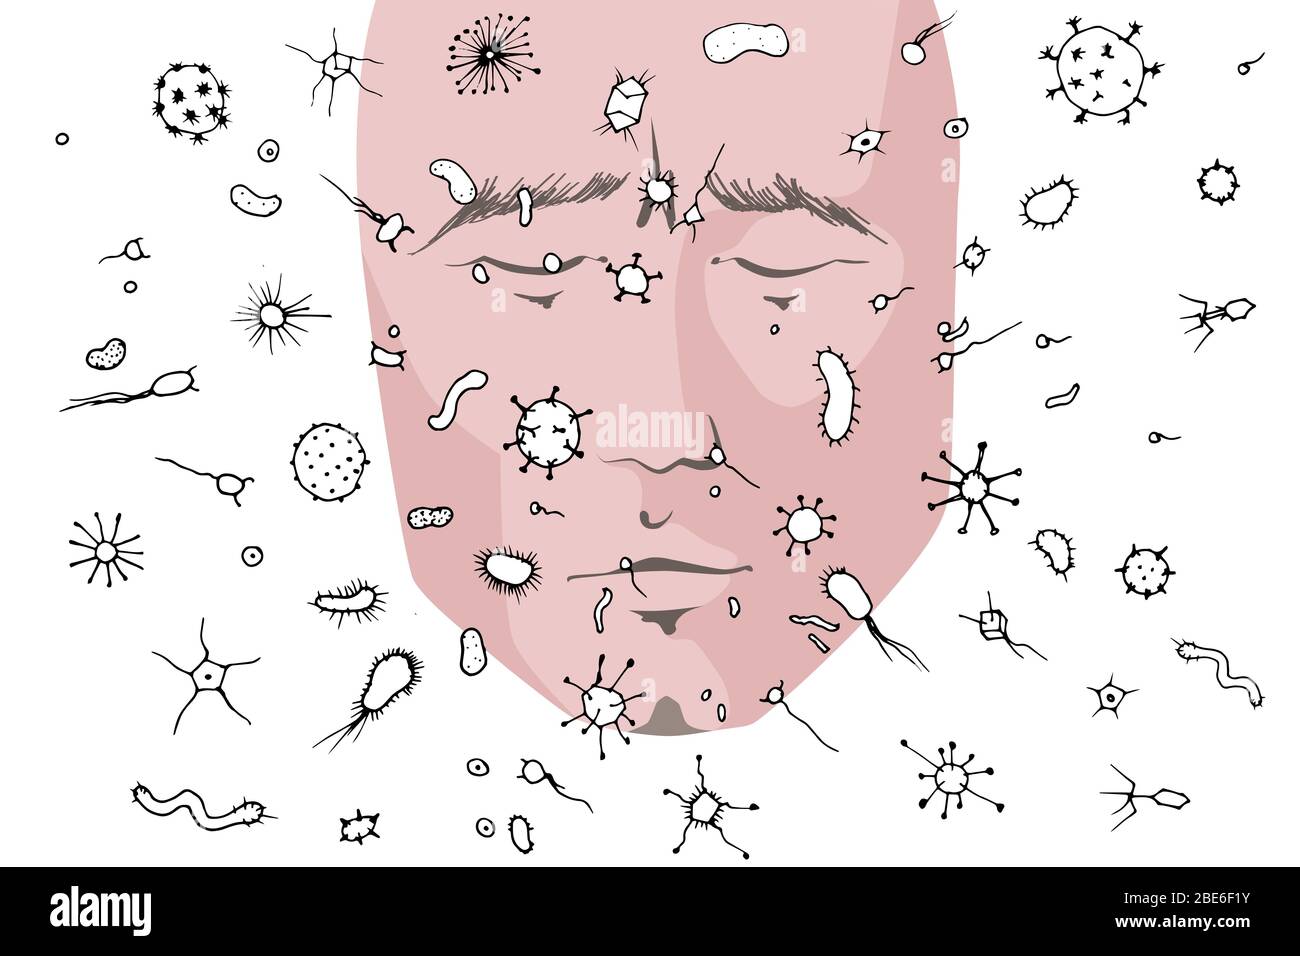 Lots of bacteria and viruses in the air and in particles, virus transfer by airborne droplets, concept. Human face and various bacteria and viruses. Stock Vector